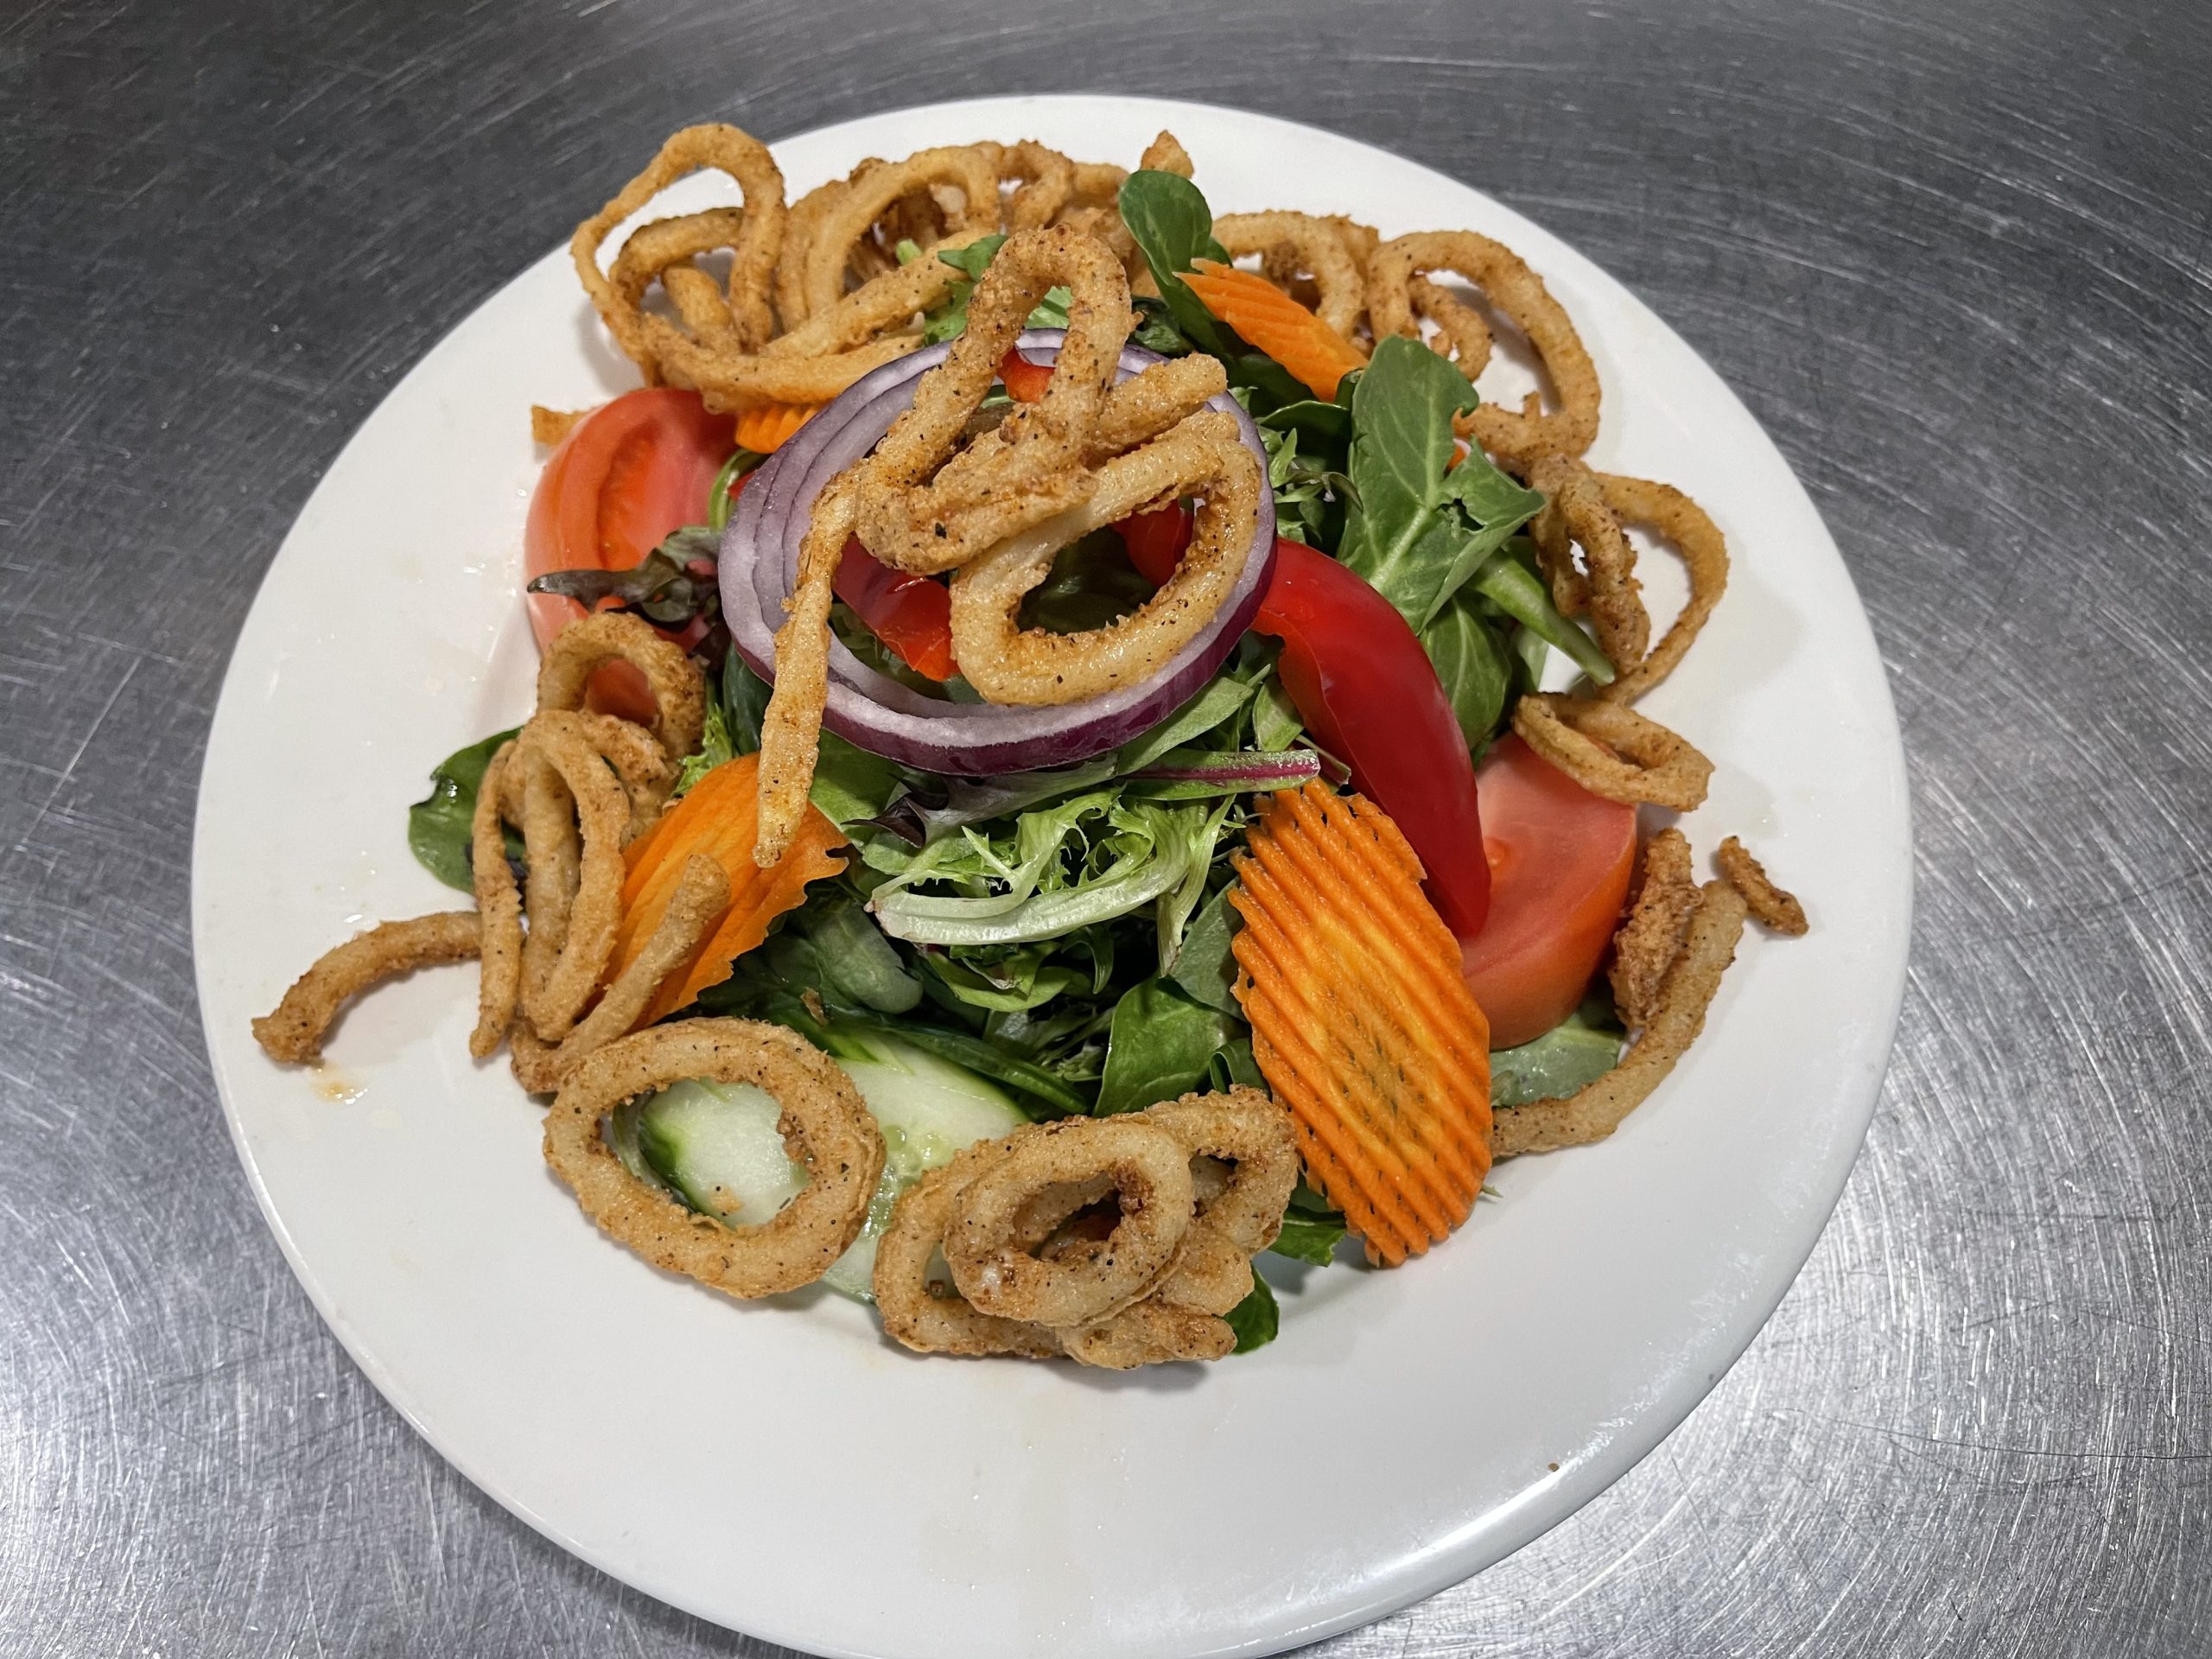 A salad with onion rings and vegetables on a plate.